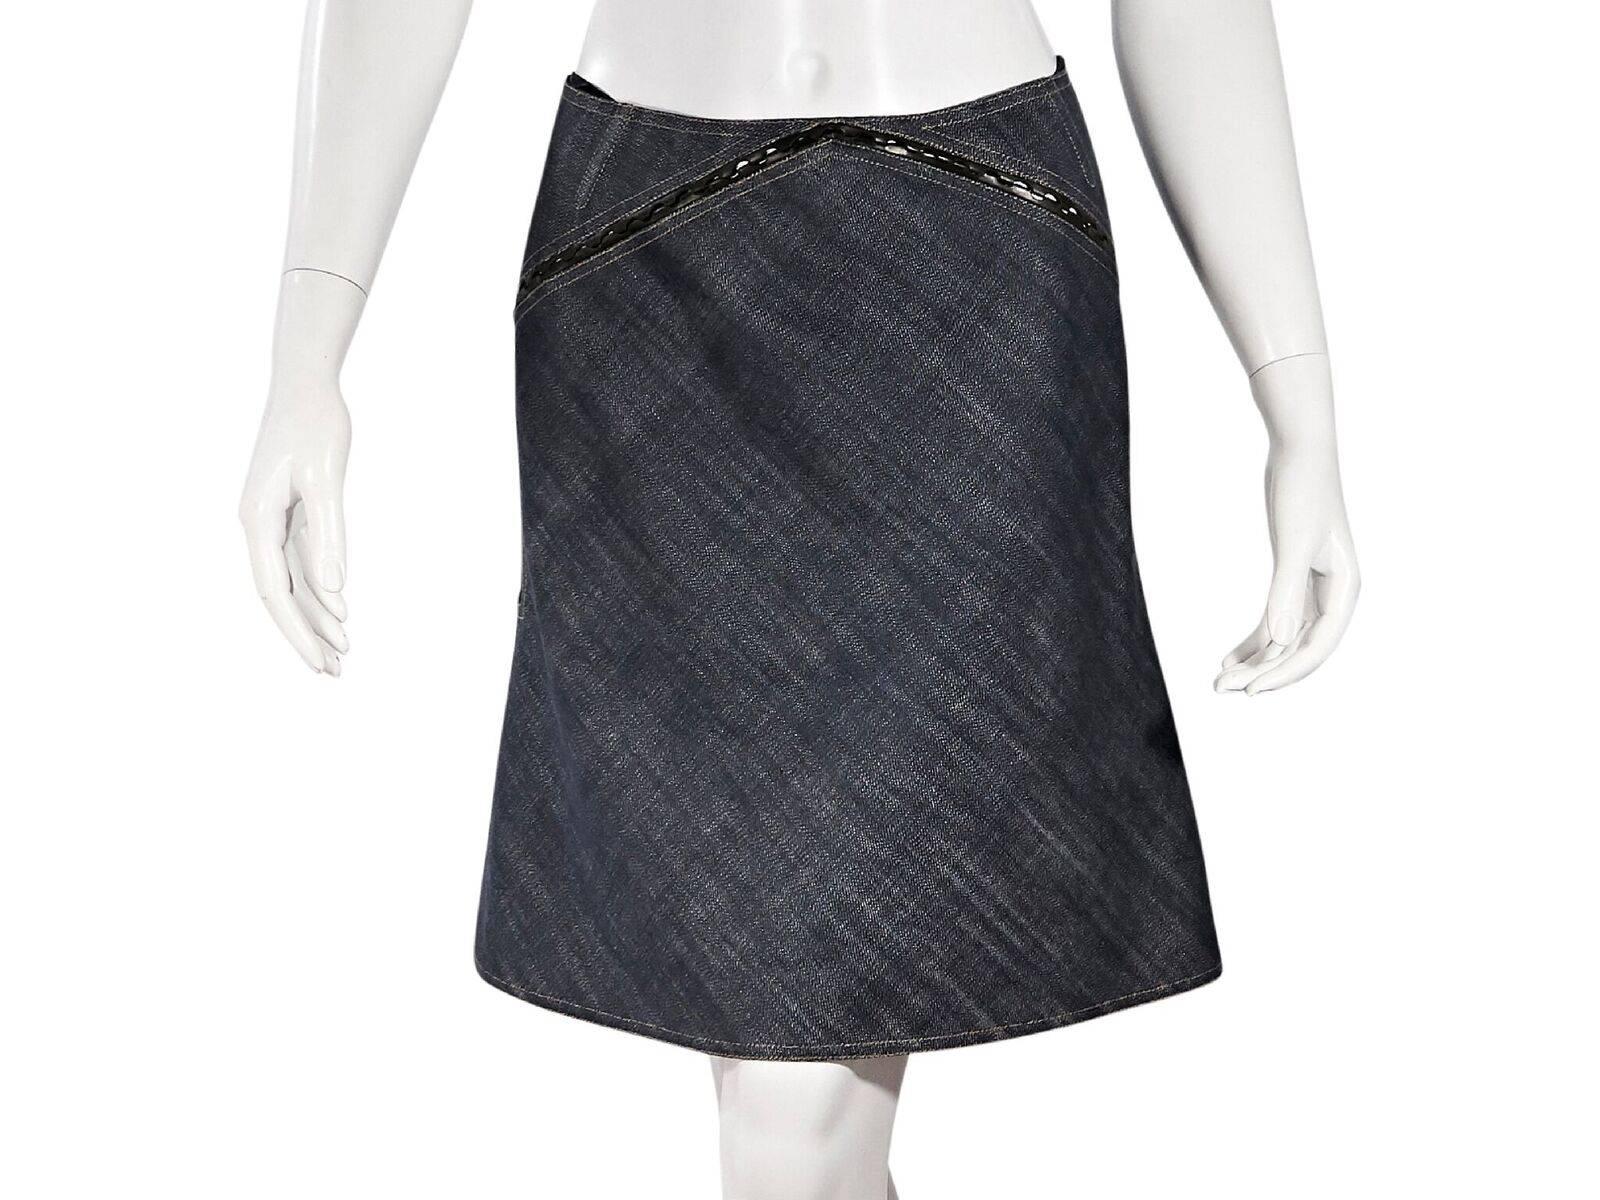 Product details:  Blue denim skirt by Alaia.  Trimmed with leather.  Double exposed back zip closures.  28